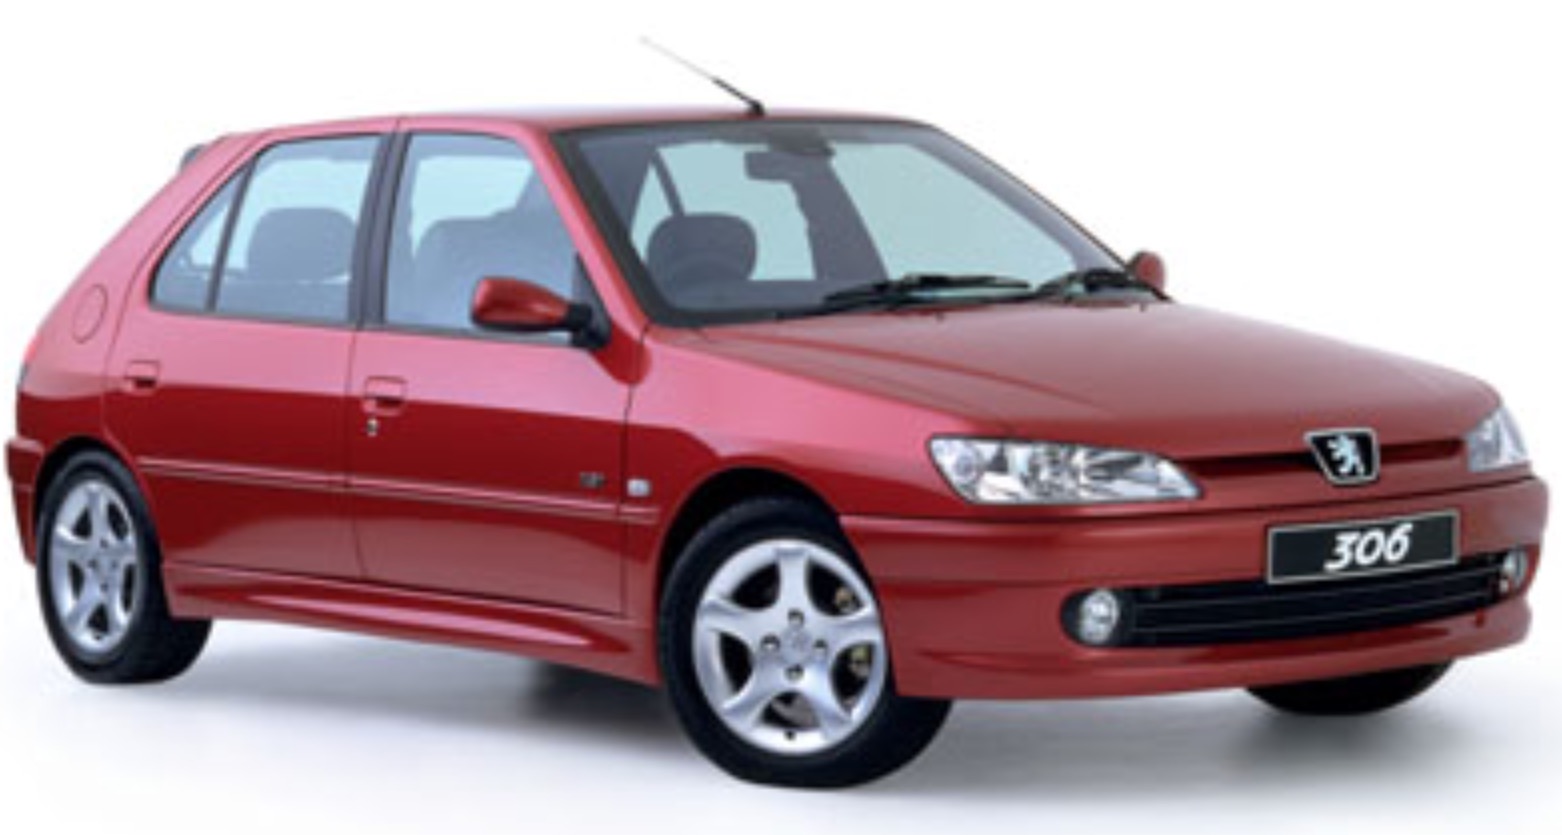 High Quality Tuning Files Peugeot 306 2.0 GTI 163hp